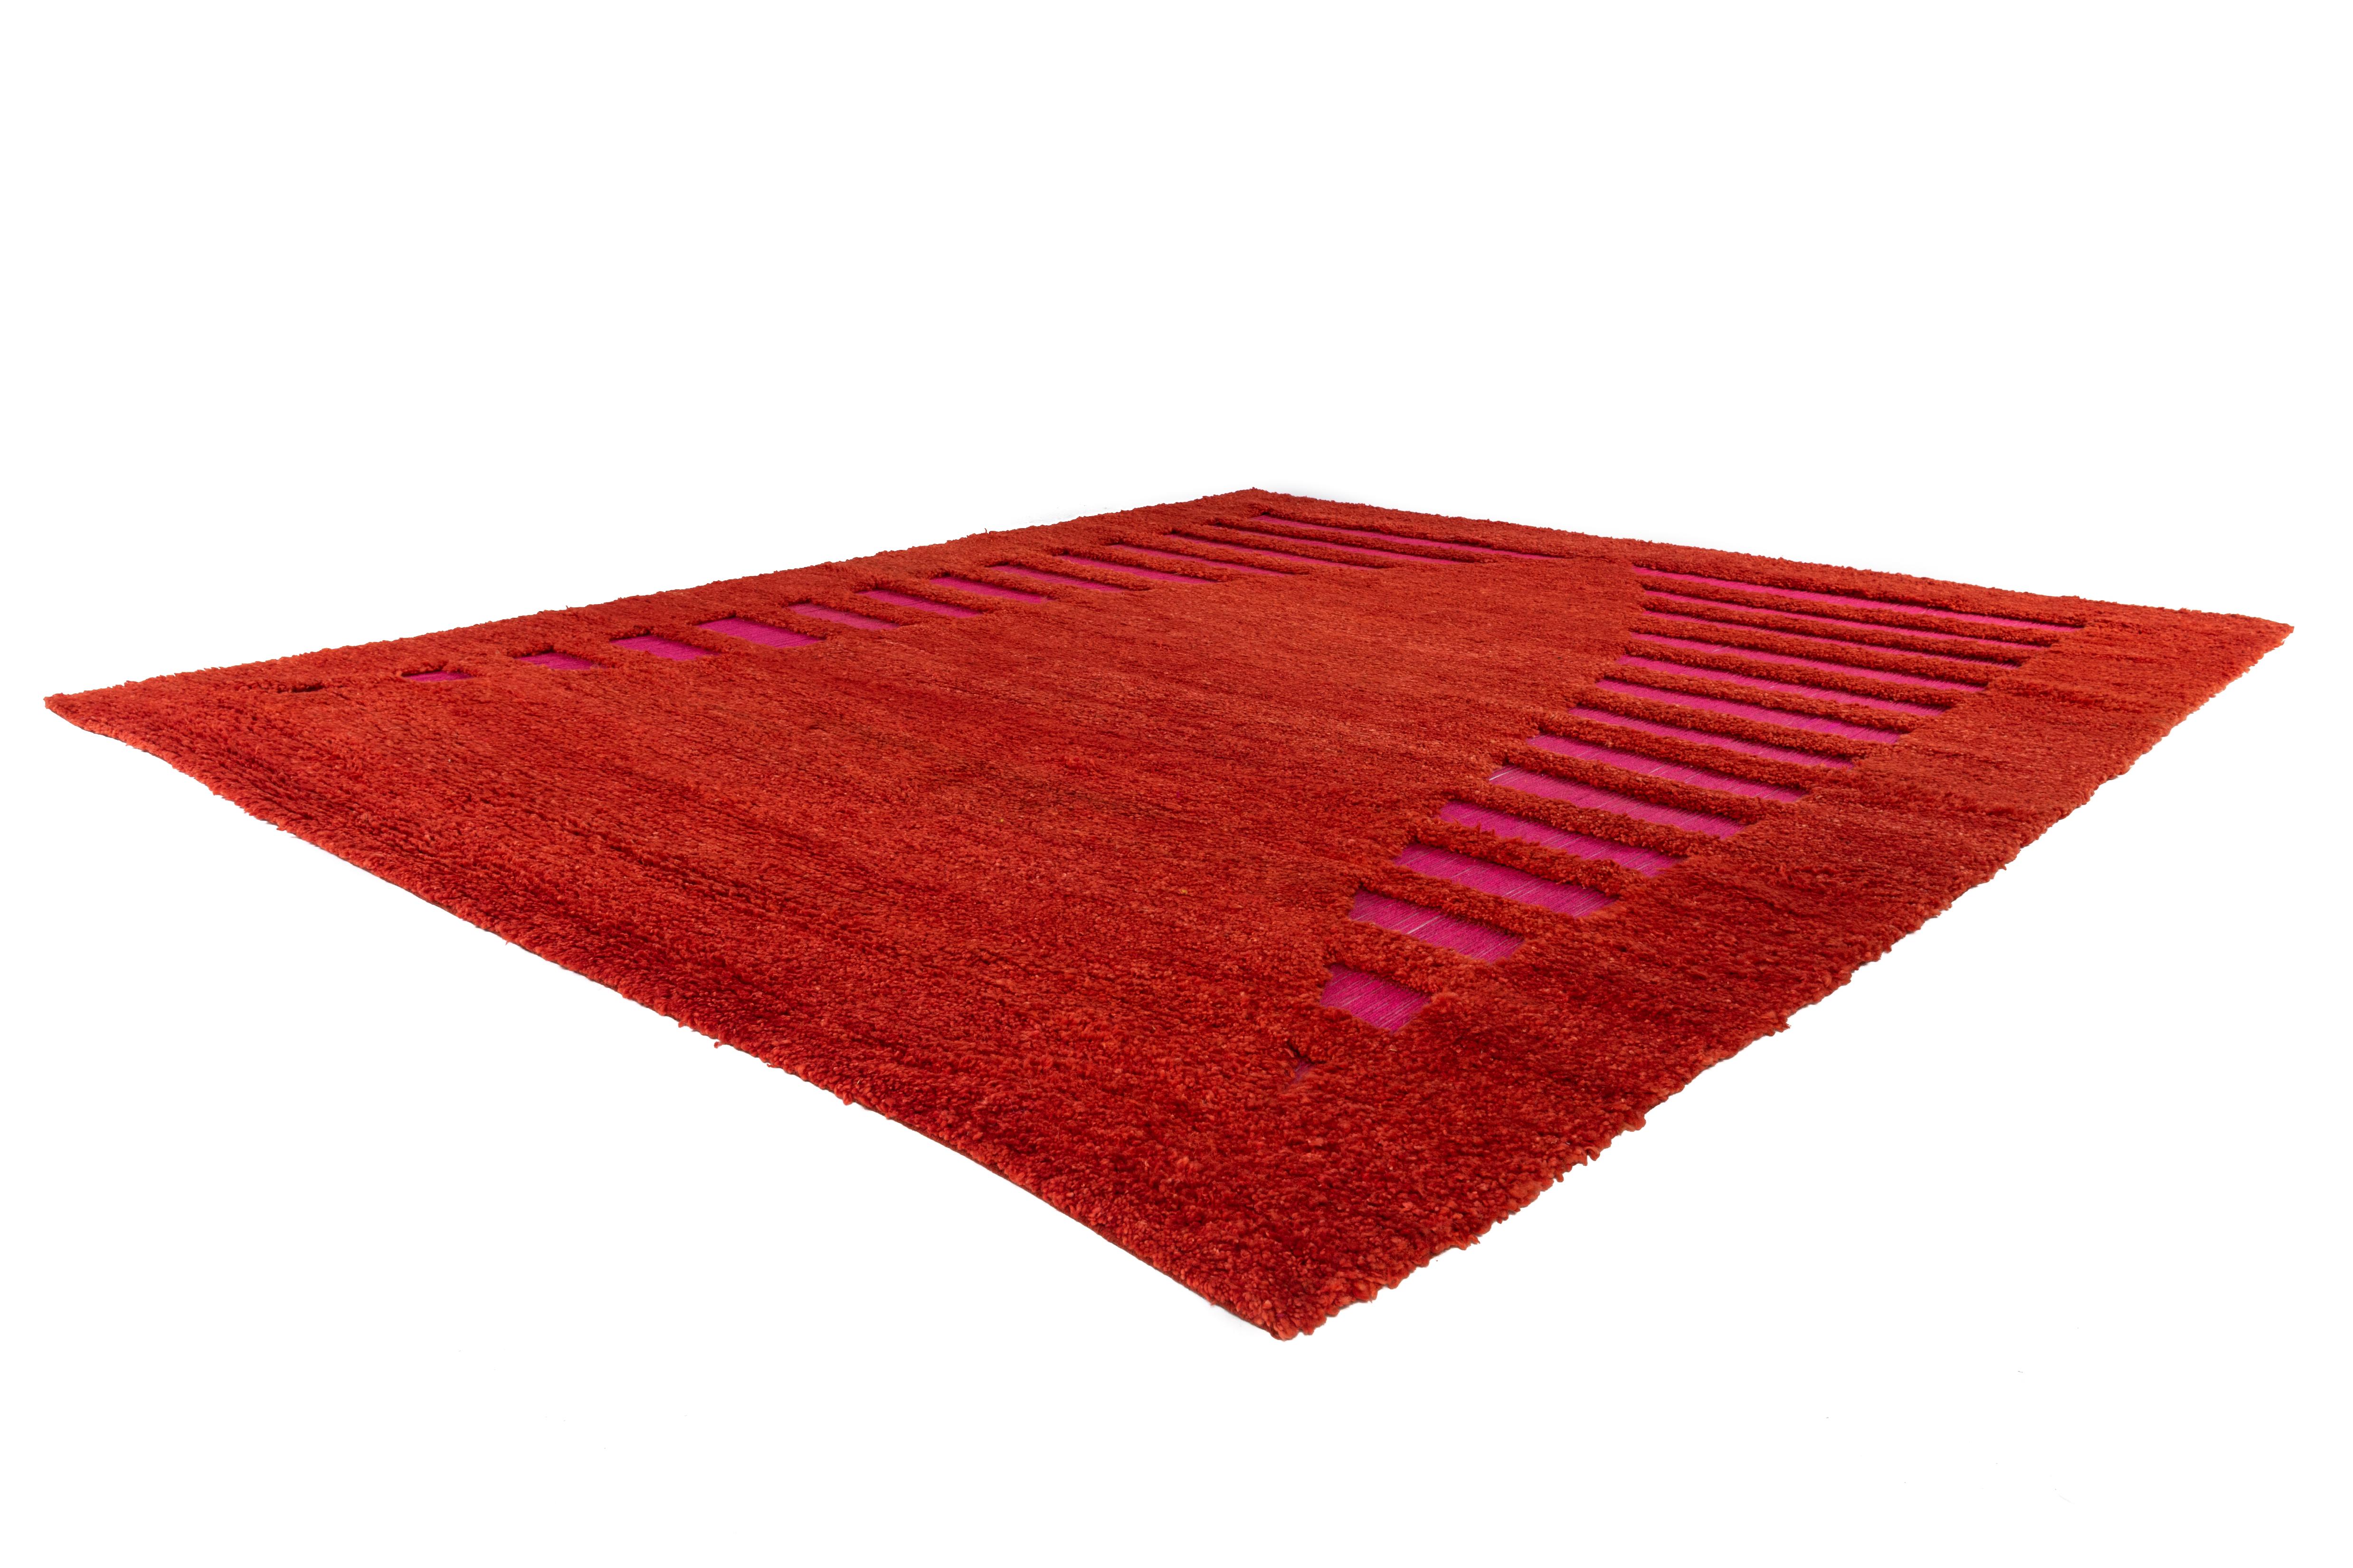 Post-Modern Gabbeh Interwoven with Warp Exposed Rug by Taher Asad Bakhtiari For Sale